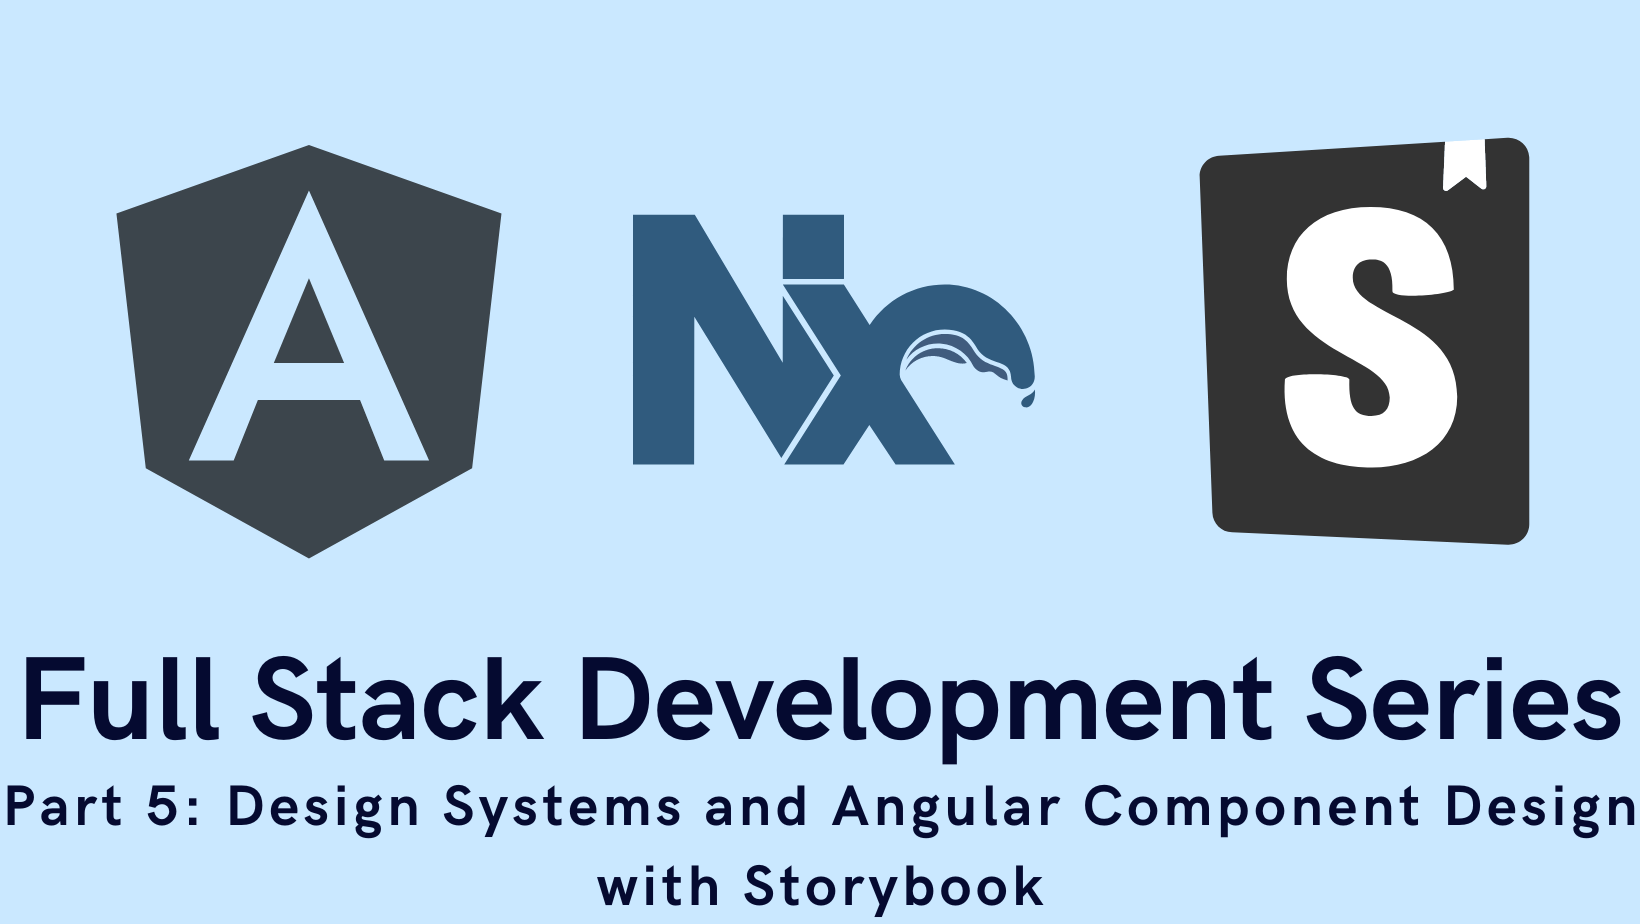 Full Stack Development Series Part 5: Design Systems and Angular Component Development with Storybook